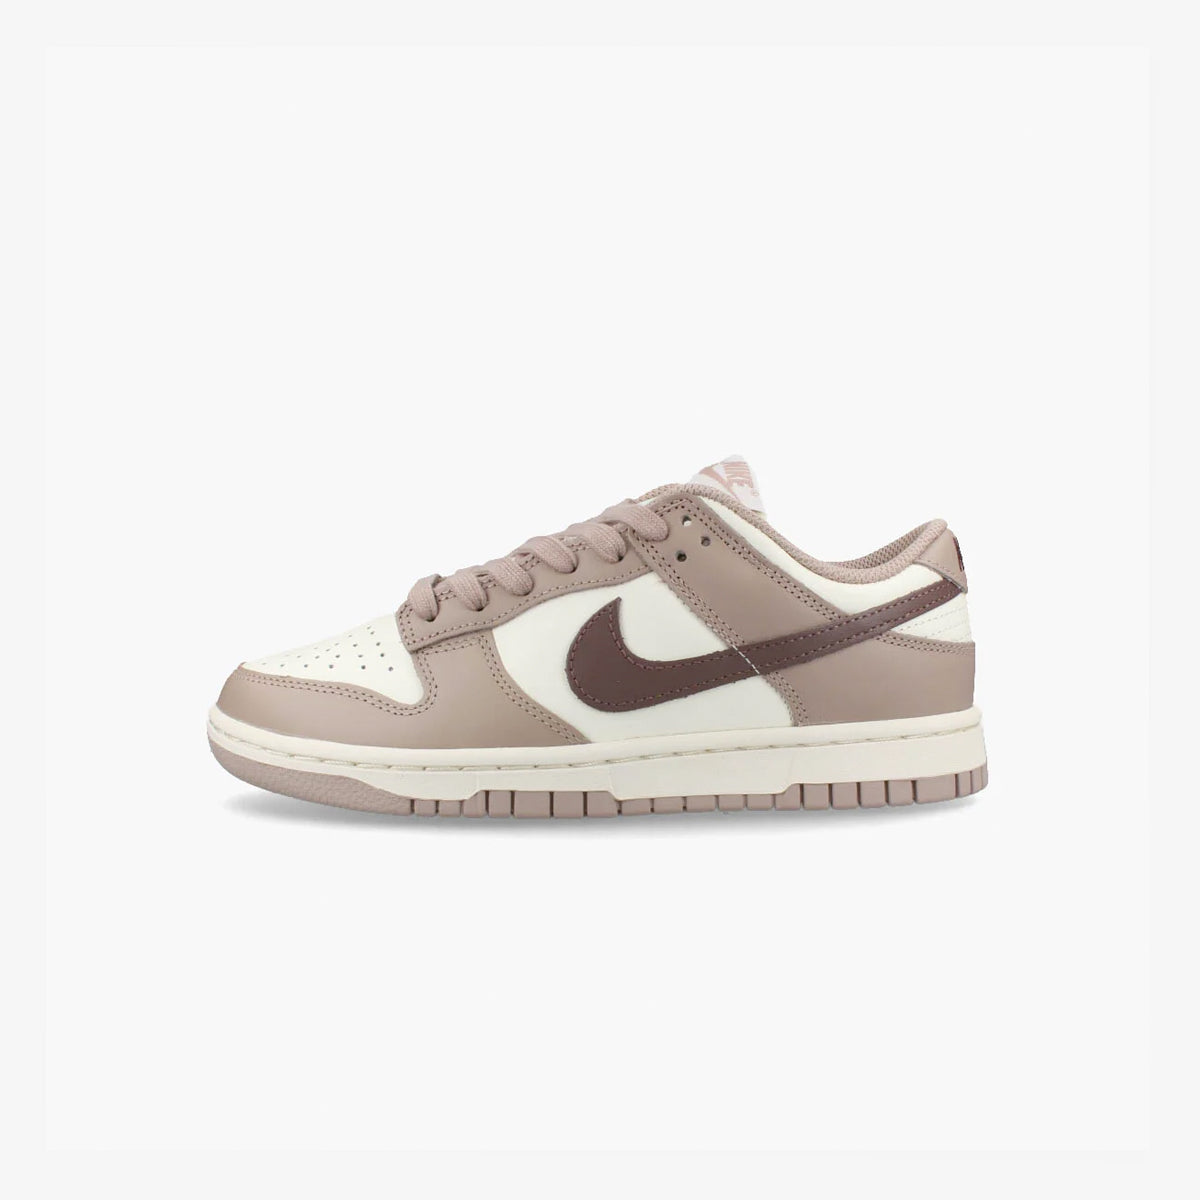 NIKE WMNS DUNK LOW SAIL/PLUM ECLIPSE/DIFFUSED TAUPE